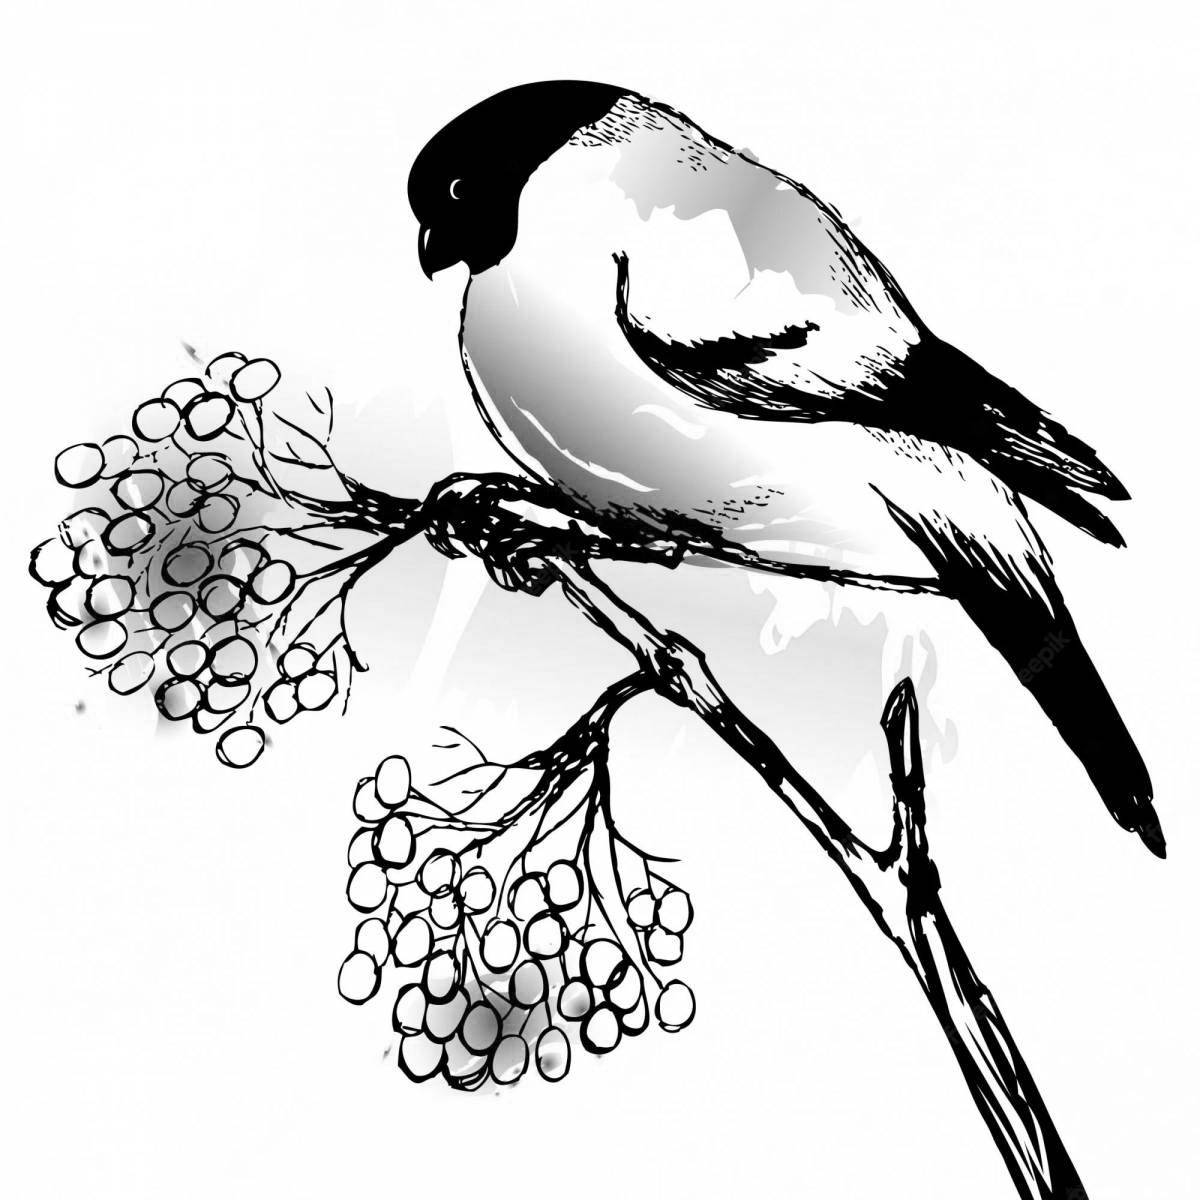 A magnificent drawing of a bullfinch on a rowan branch